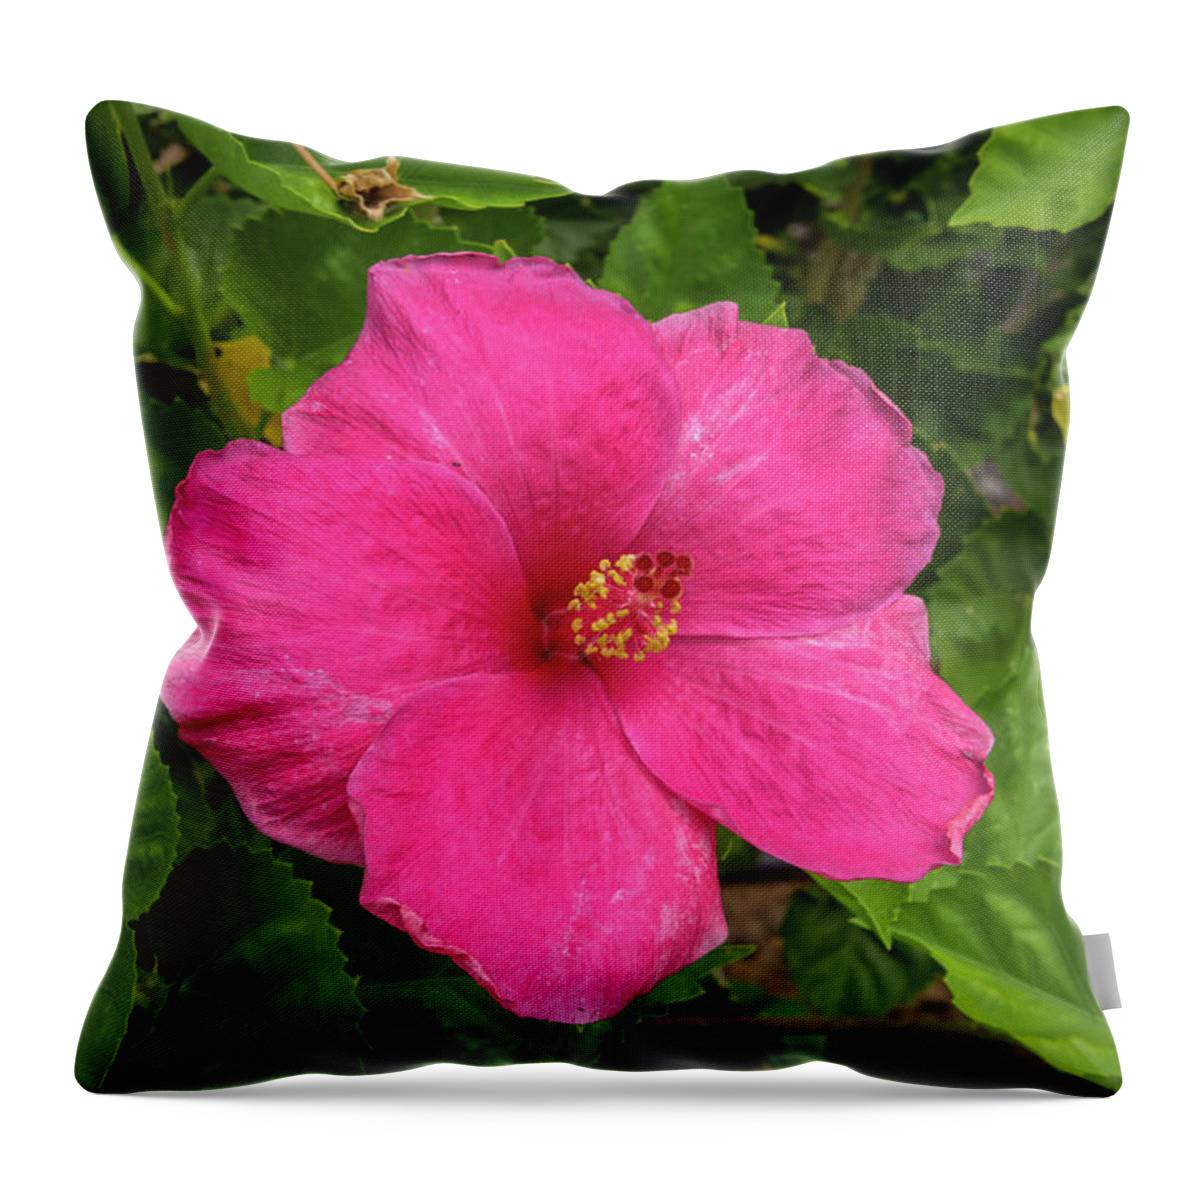 Flowers Throw Pillow featuring the photograph Hibiscus by Jim Thompson